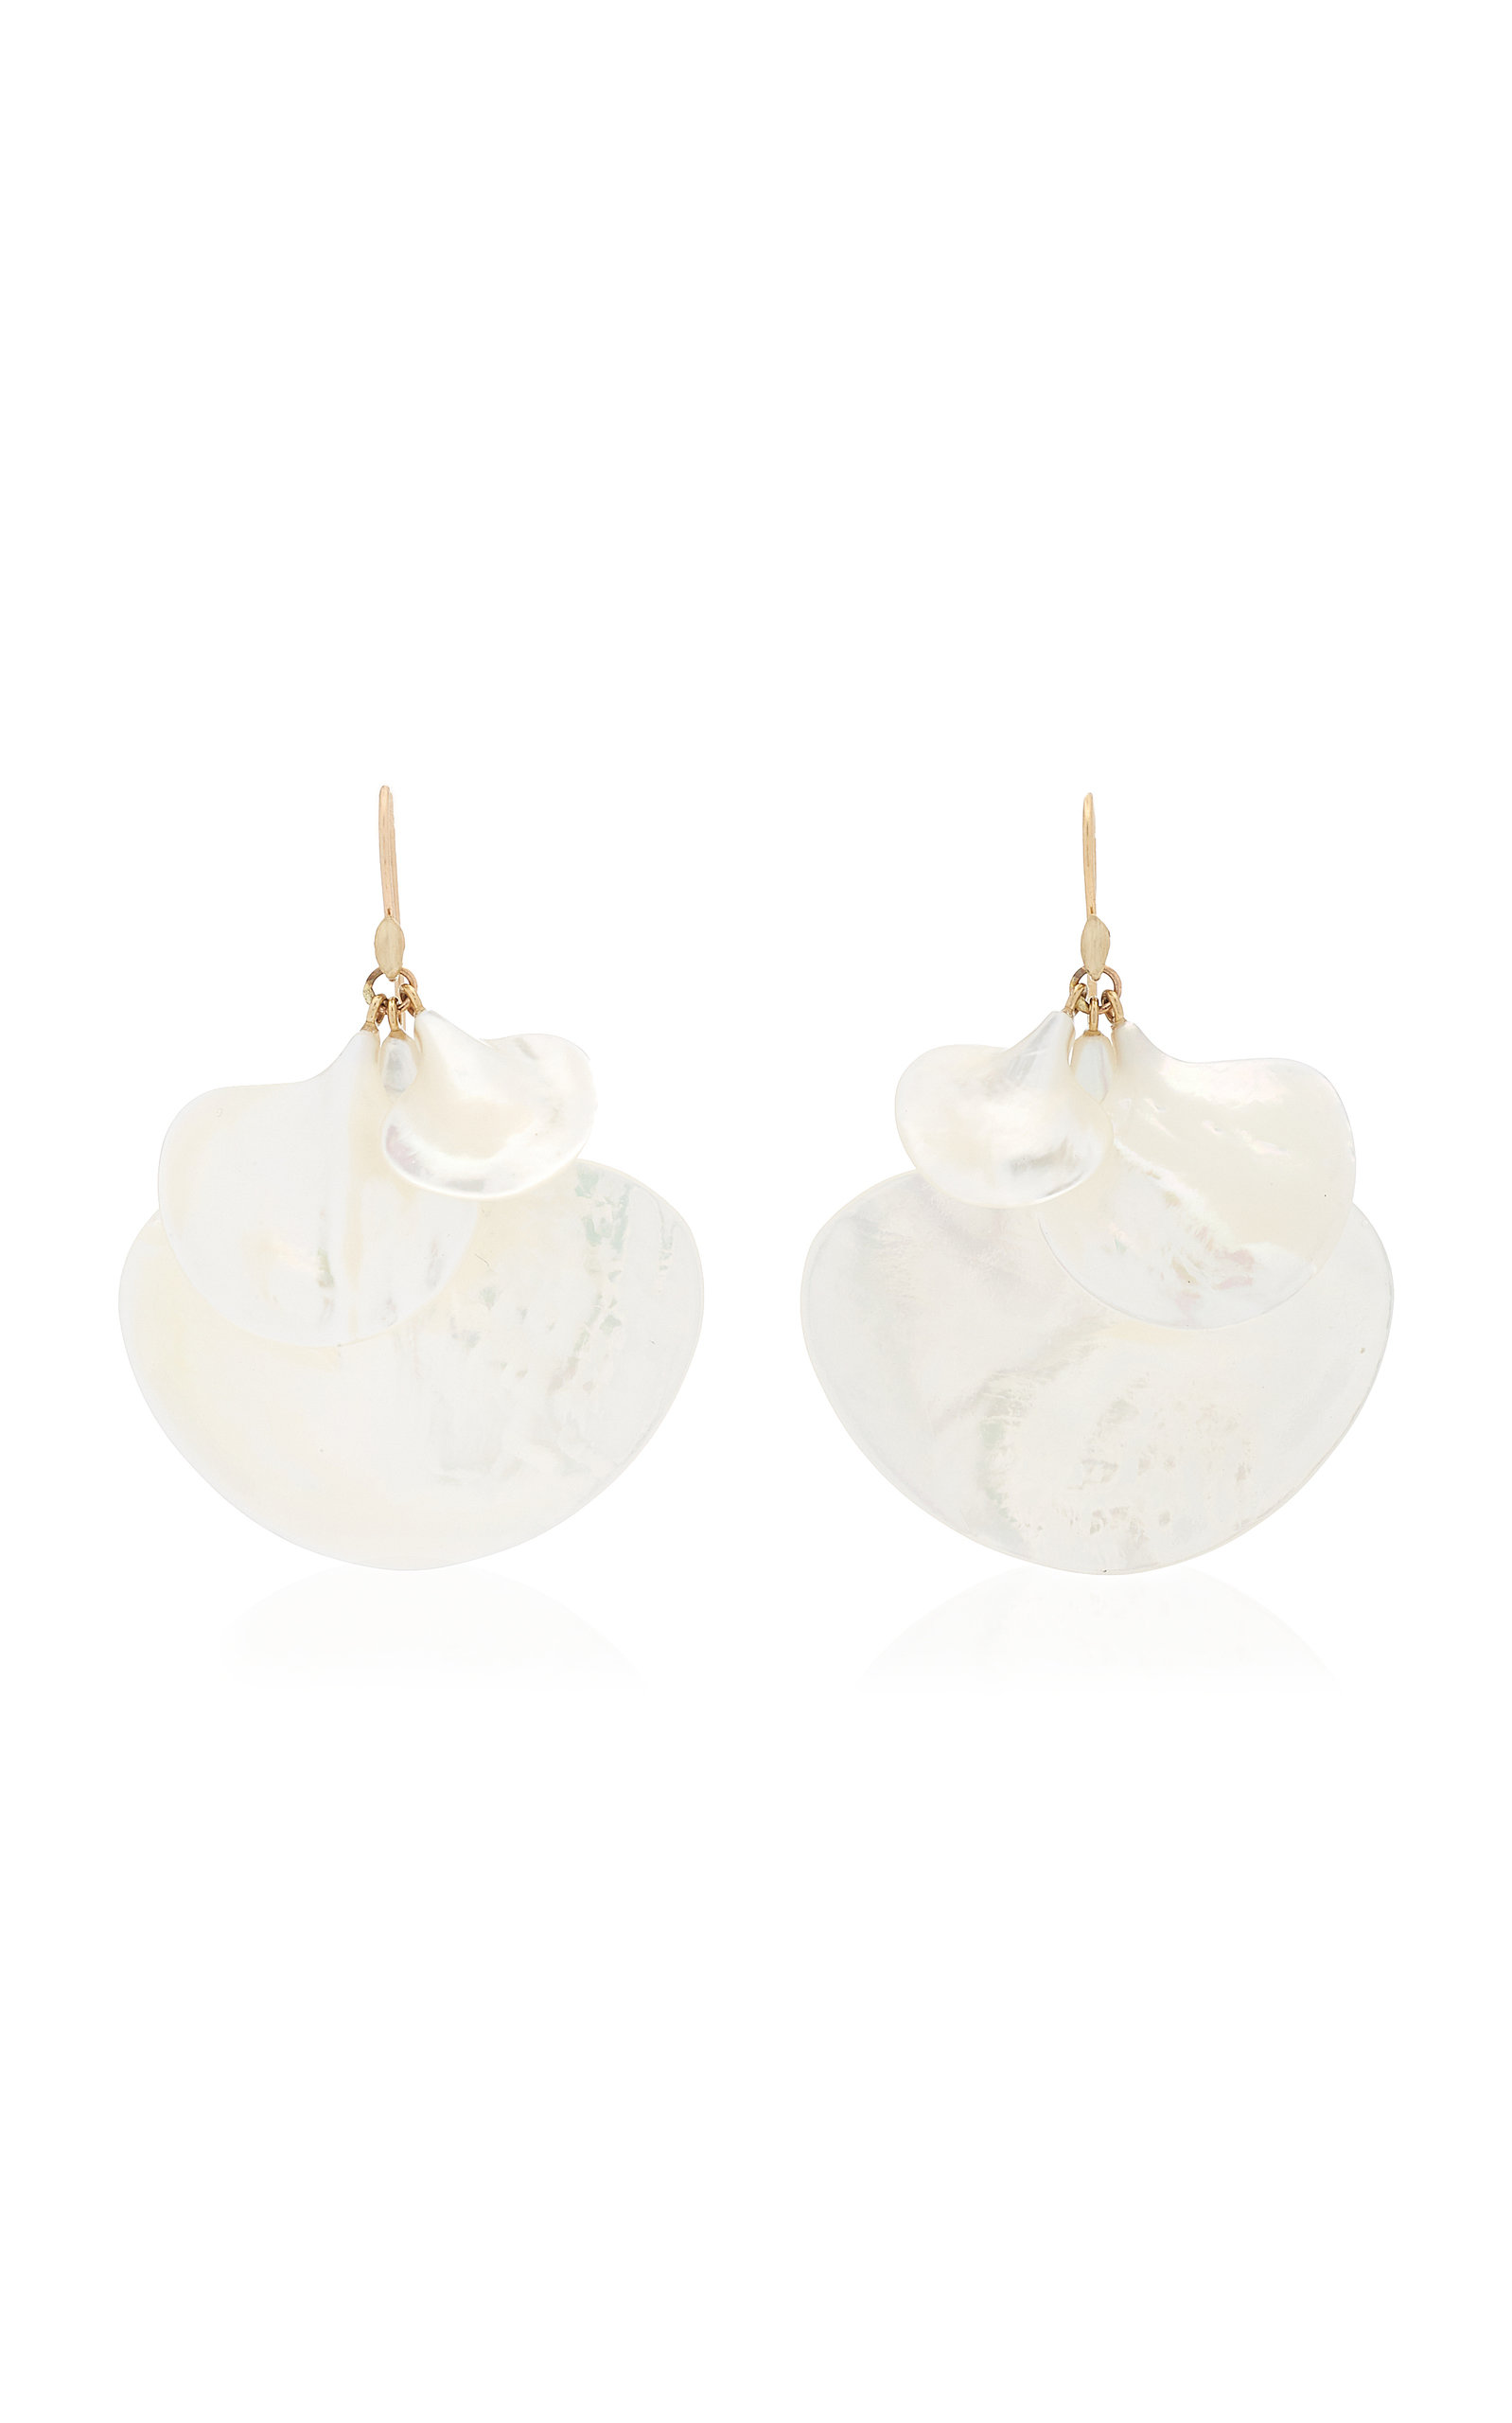 Ginkgo Cluster 14K Yellow Gold Mother-of-Pearl Earrings